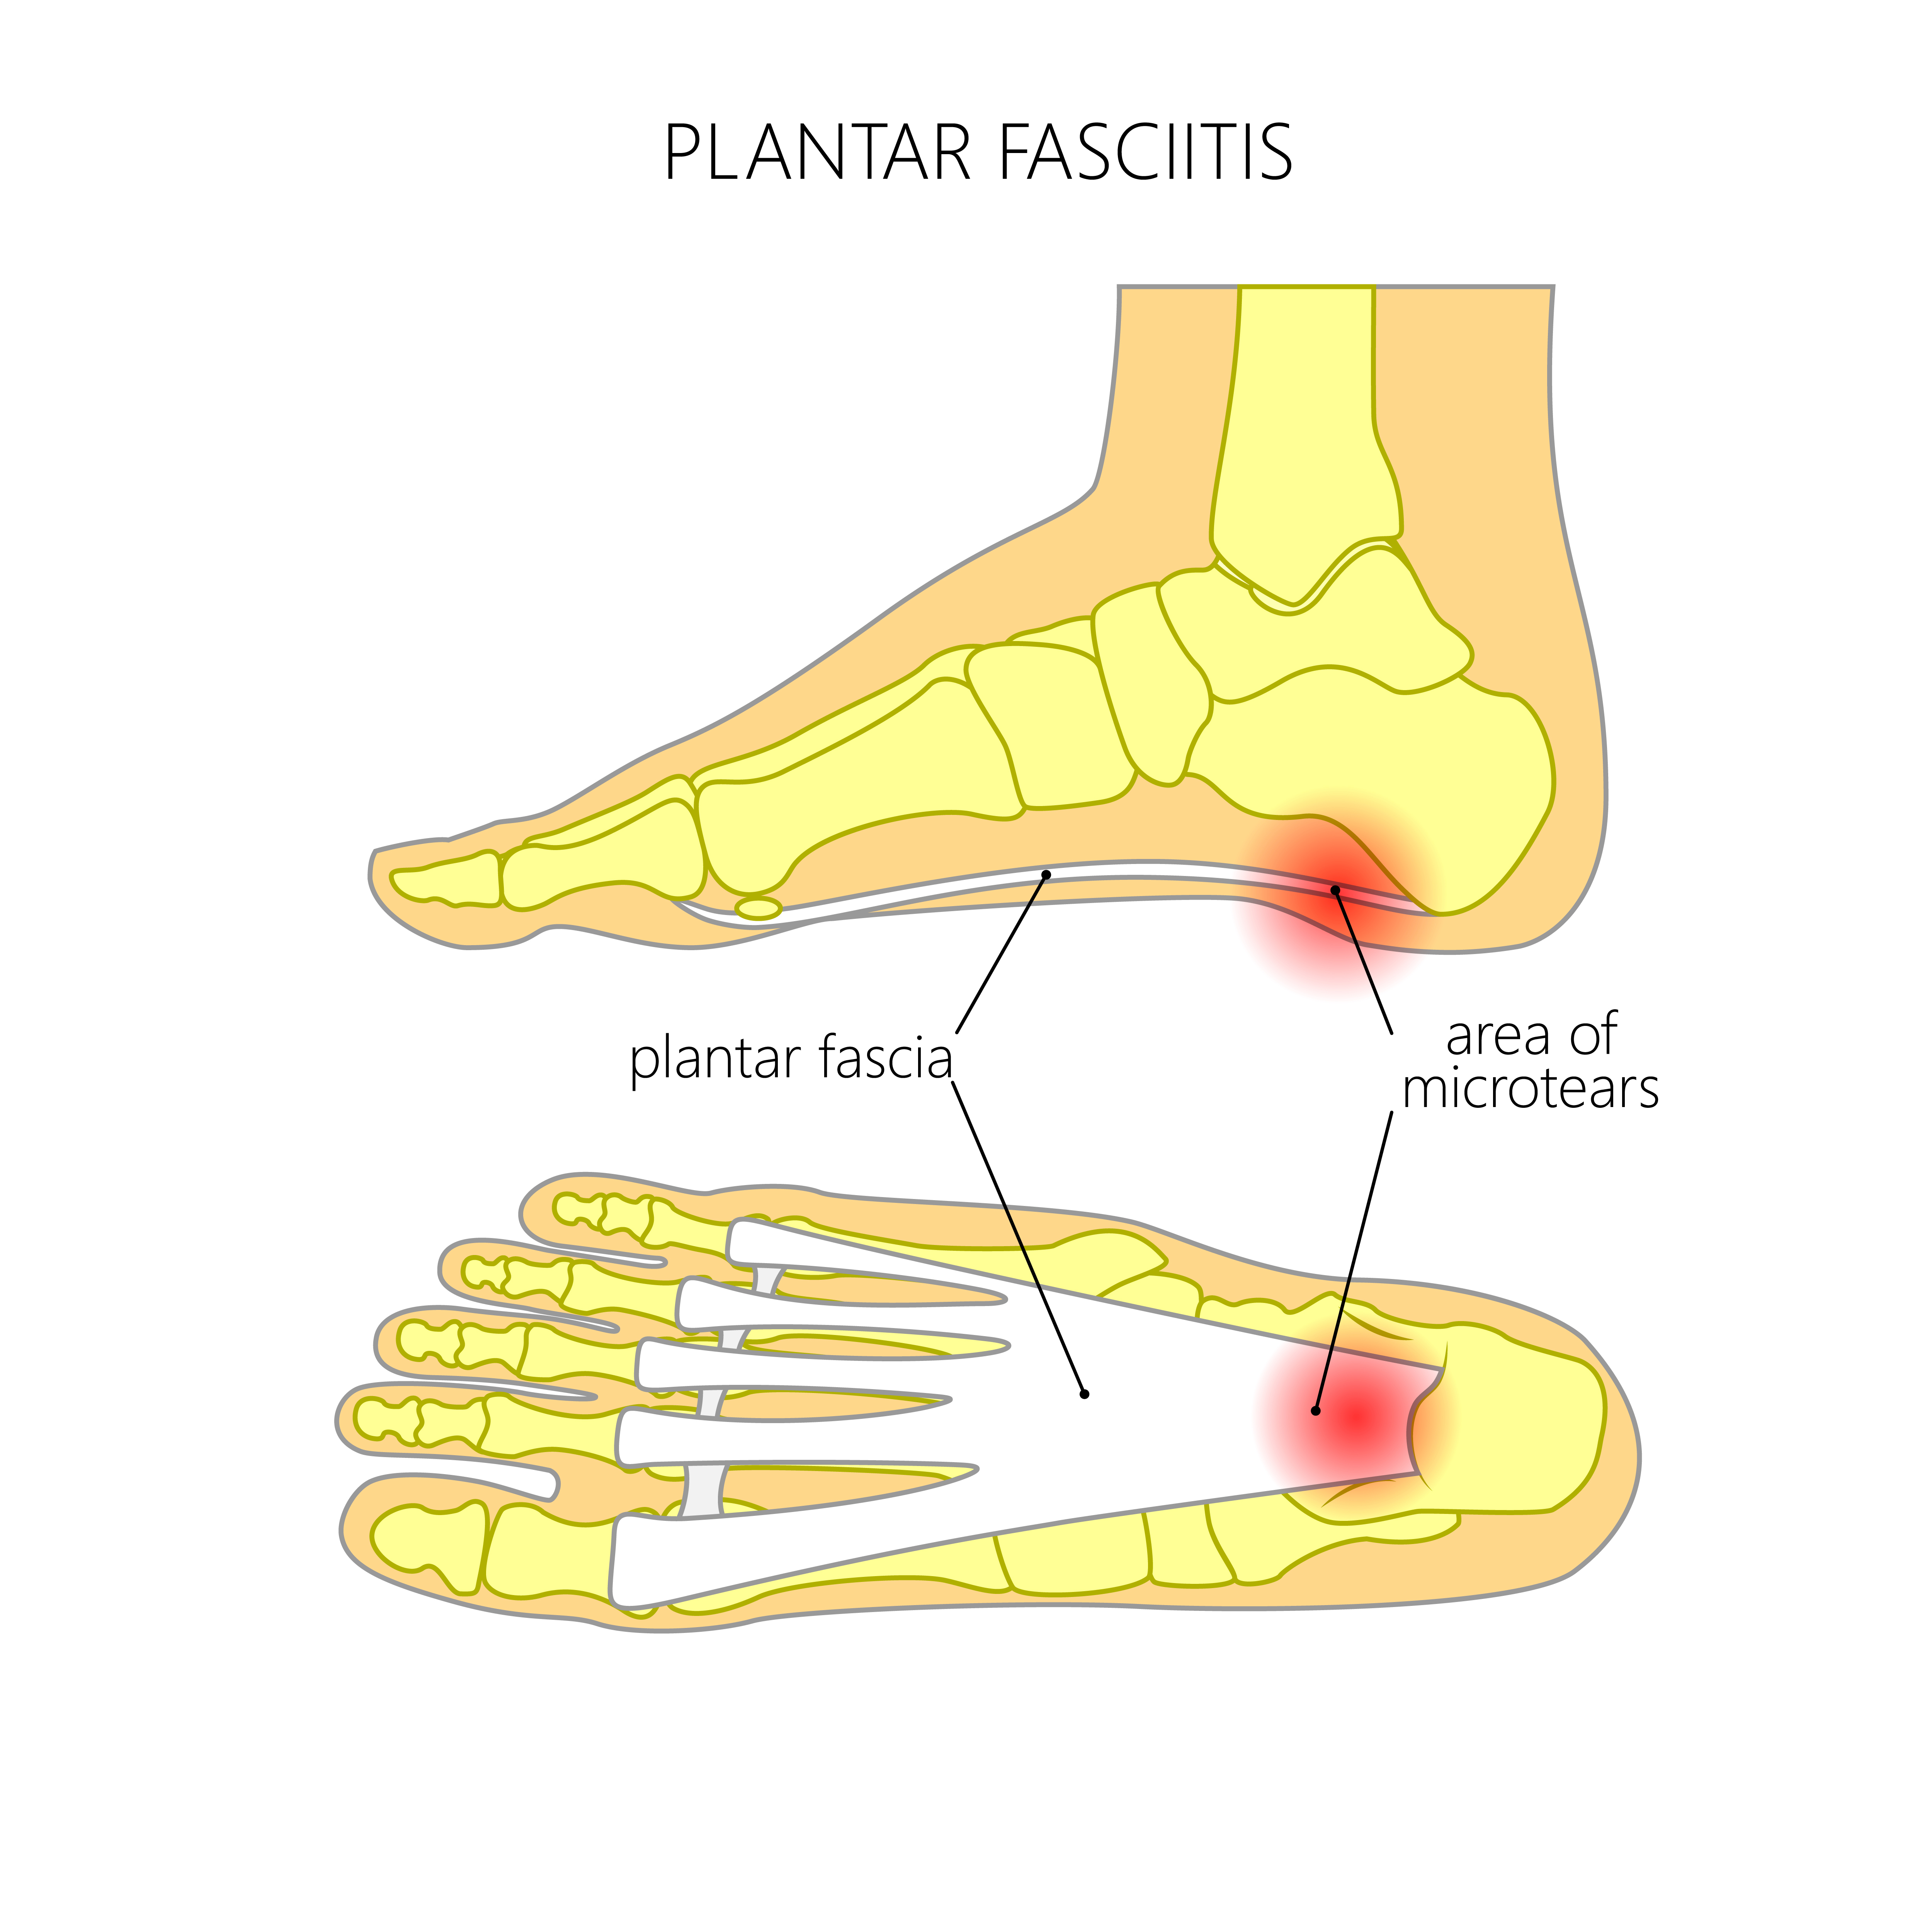 Is there a treatment for plantar fasciitis?